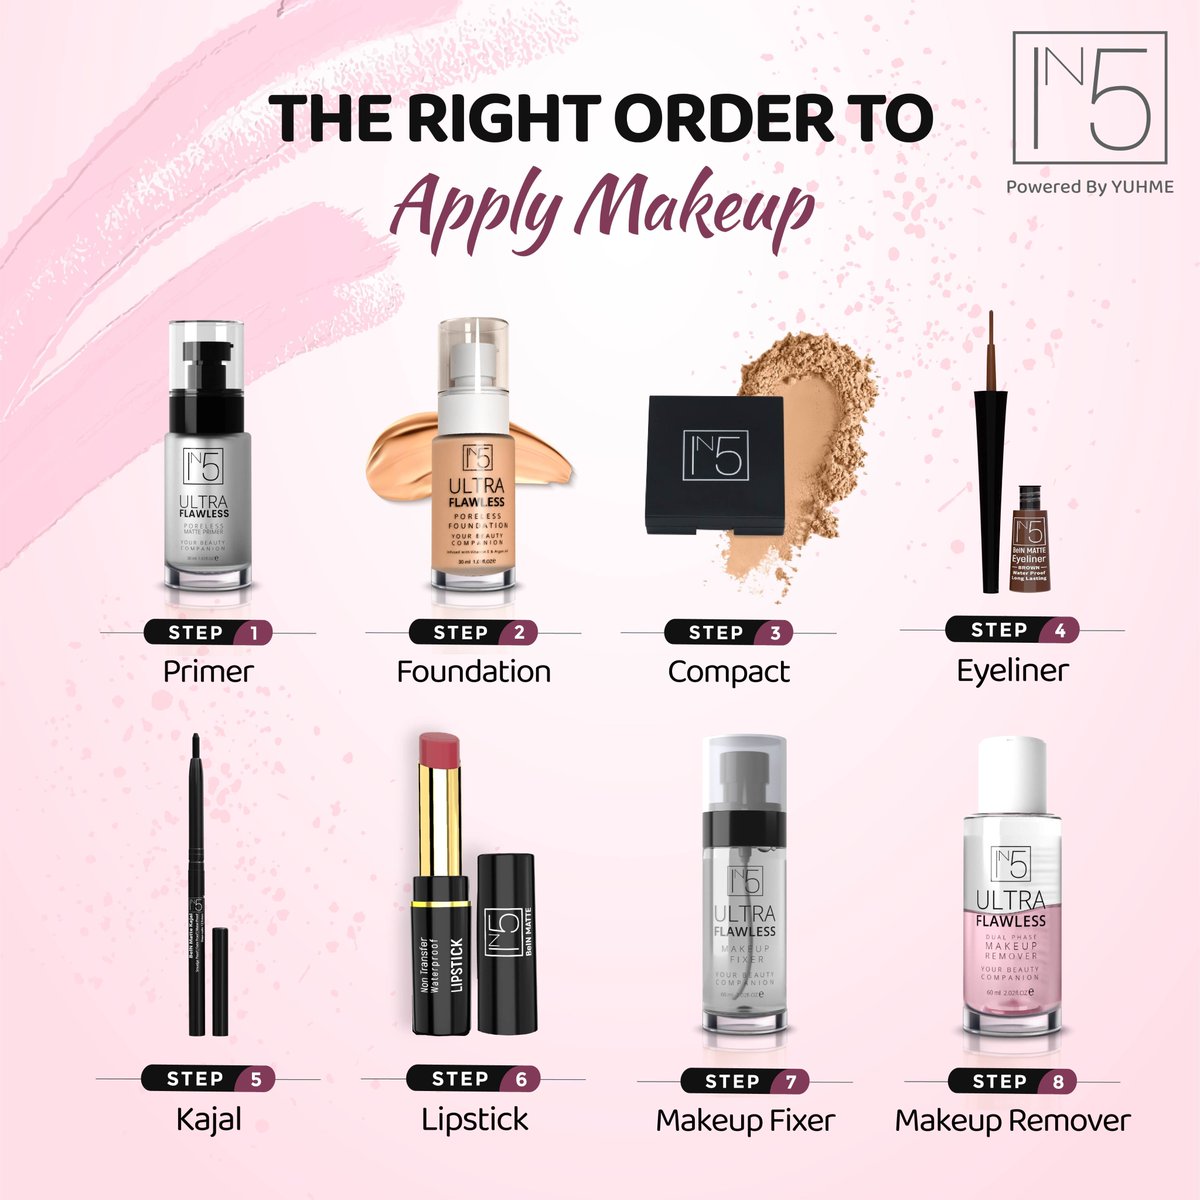 Your ultimate beauty roadmap: IN5 - The Right Order to Apply Makeup!
.
.
.
#yuhmicosmetic #in5 #in5cosmetics #yuhme #cosmetics #cosmeticslover #cosmeticschallenge #makeup #makeupchallange #challenges #beauty #beautytips #bestmakeupproducts #nashik #nashikcity #mumbai #pune